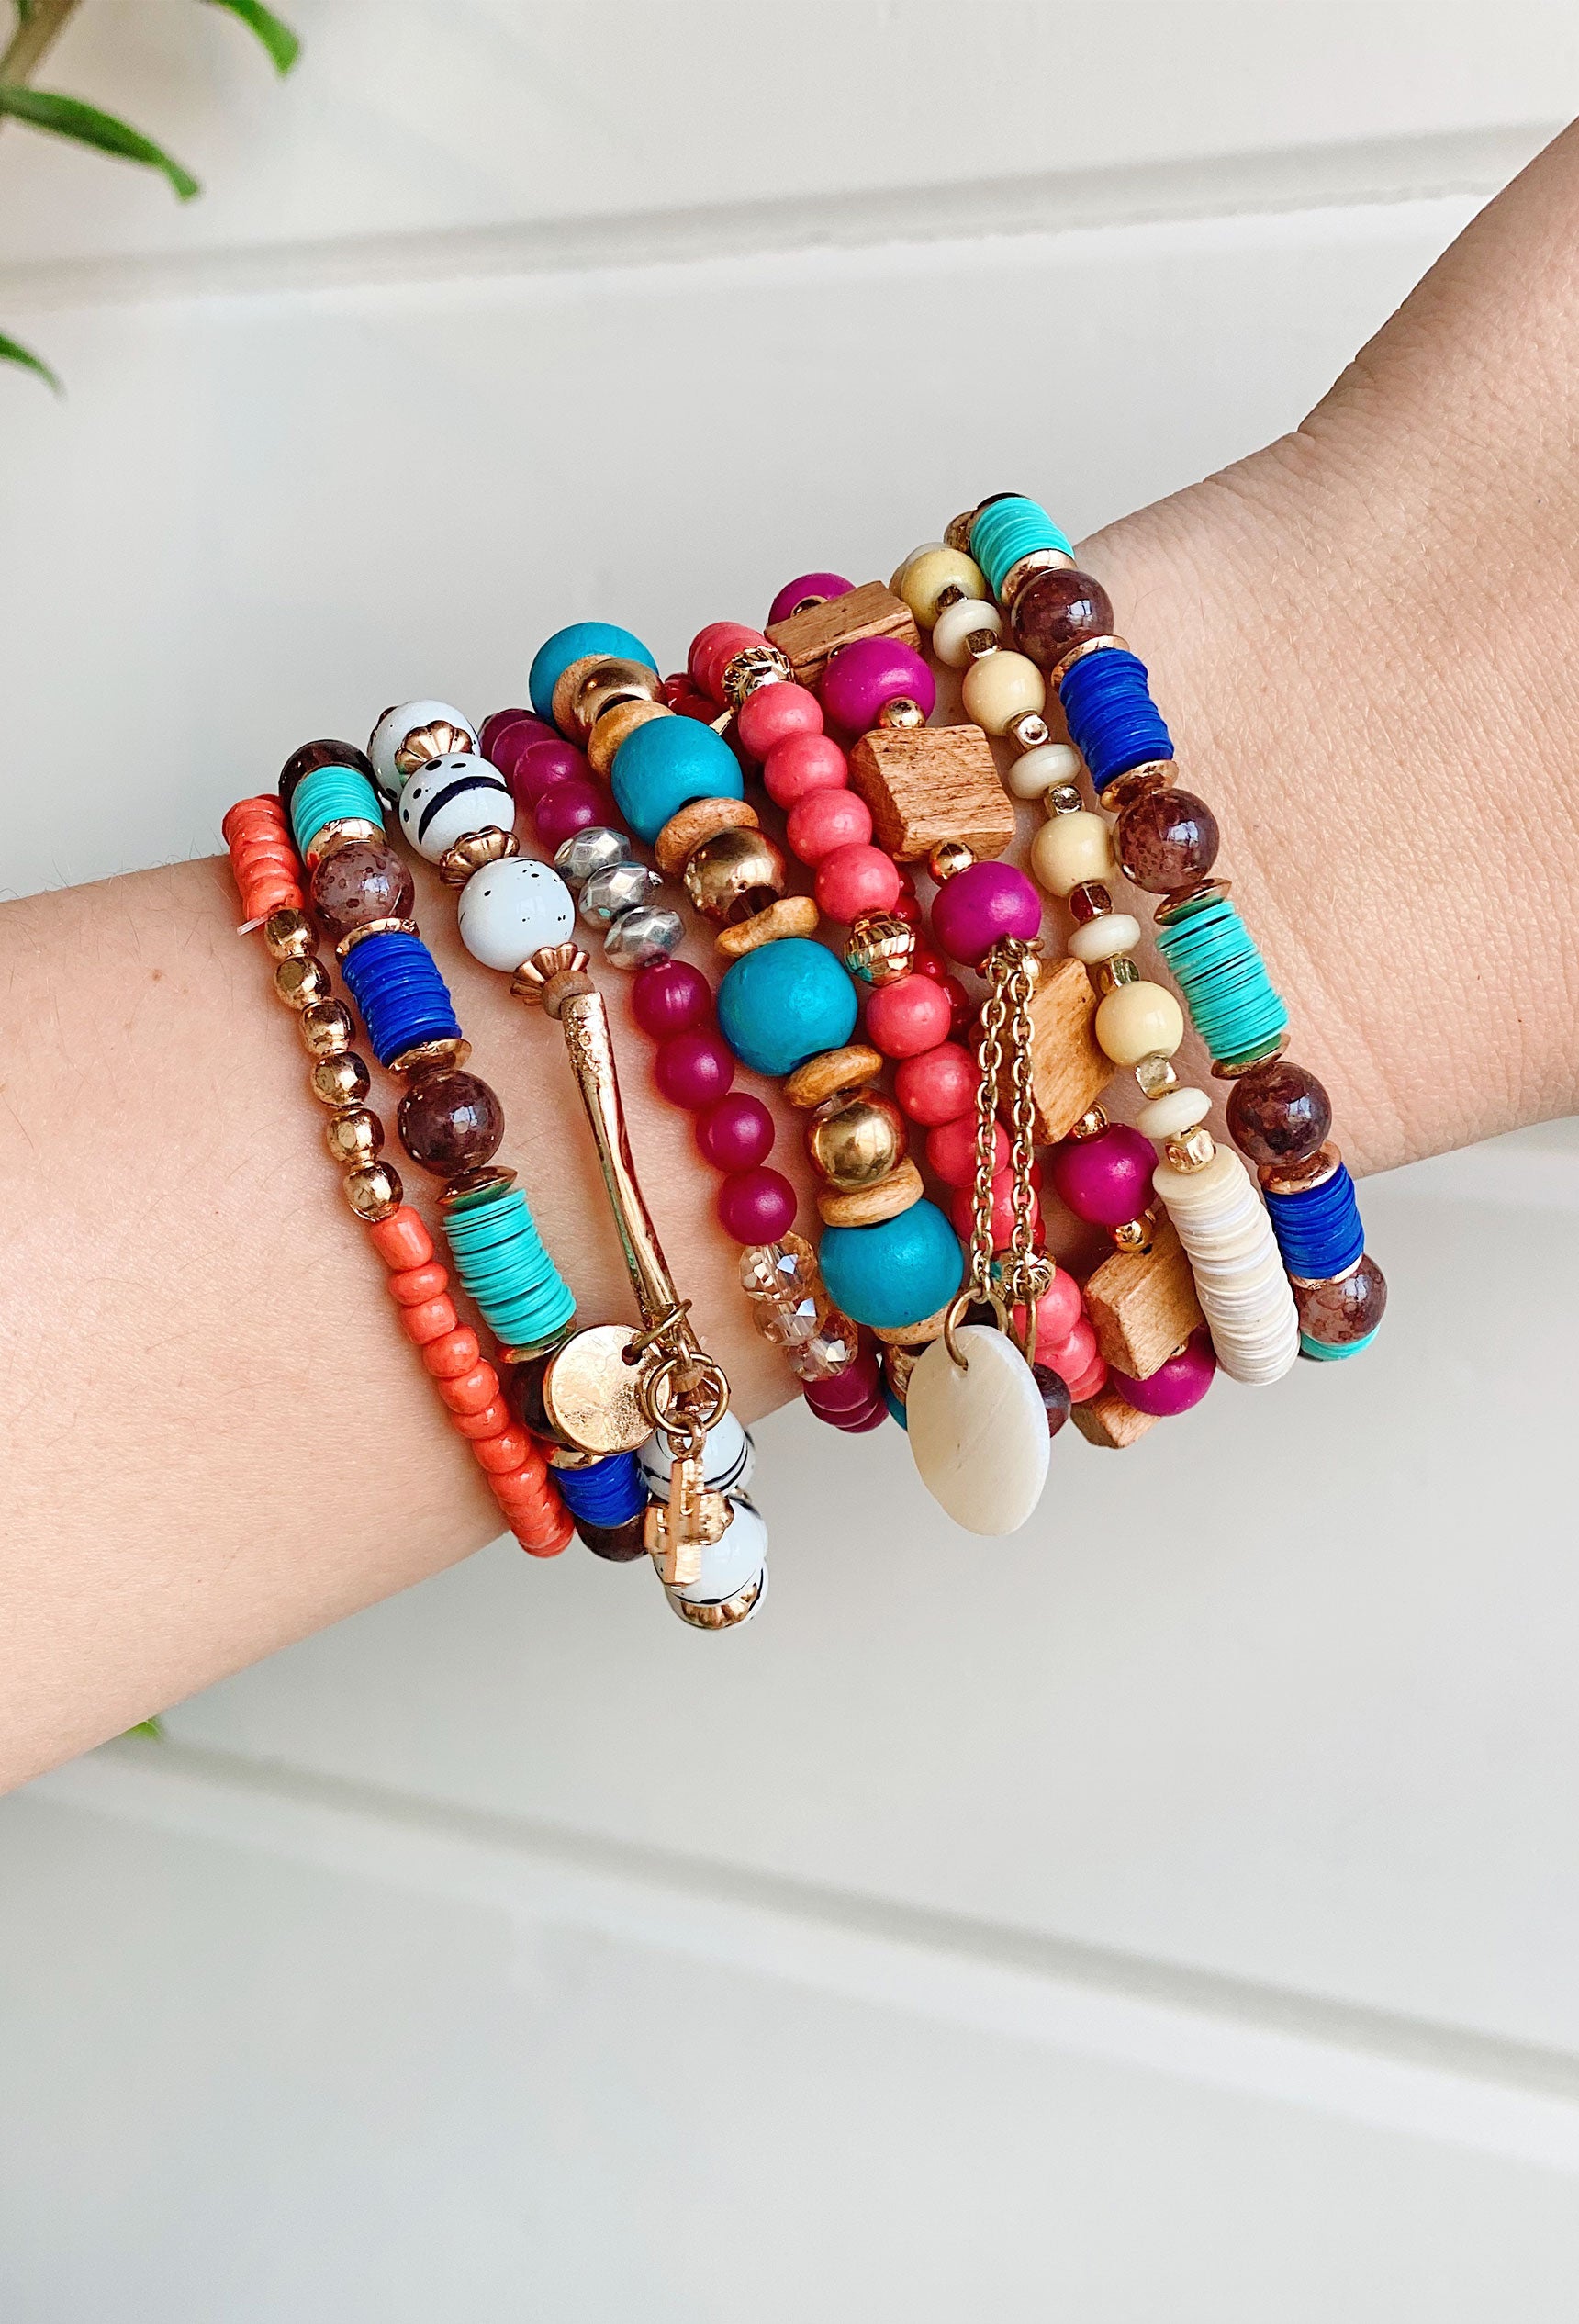 Cabana Retreat Bracelet Set, set of 10 bracelets, variety of different colored beads with wooded beads and gold beads, charms hanging from few bracelets